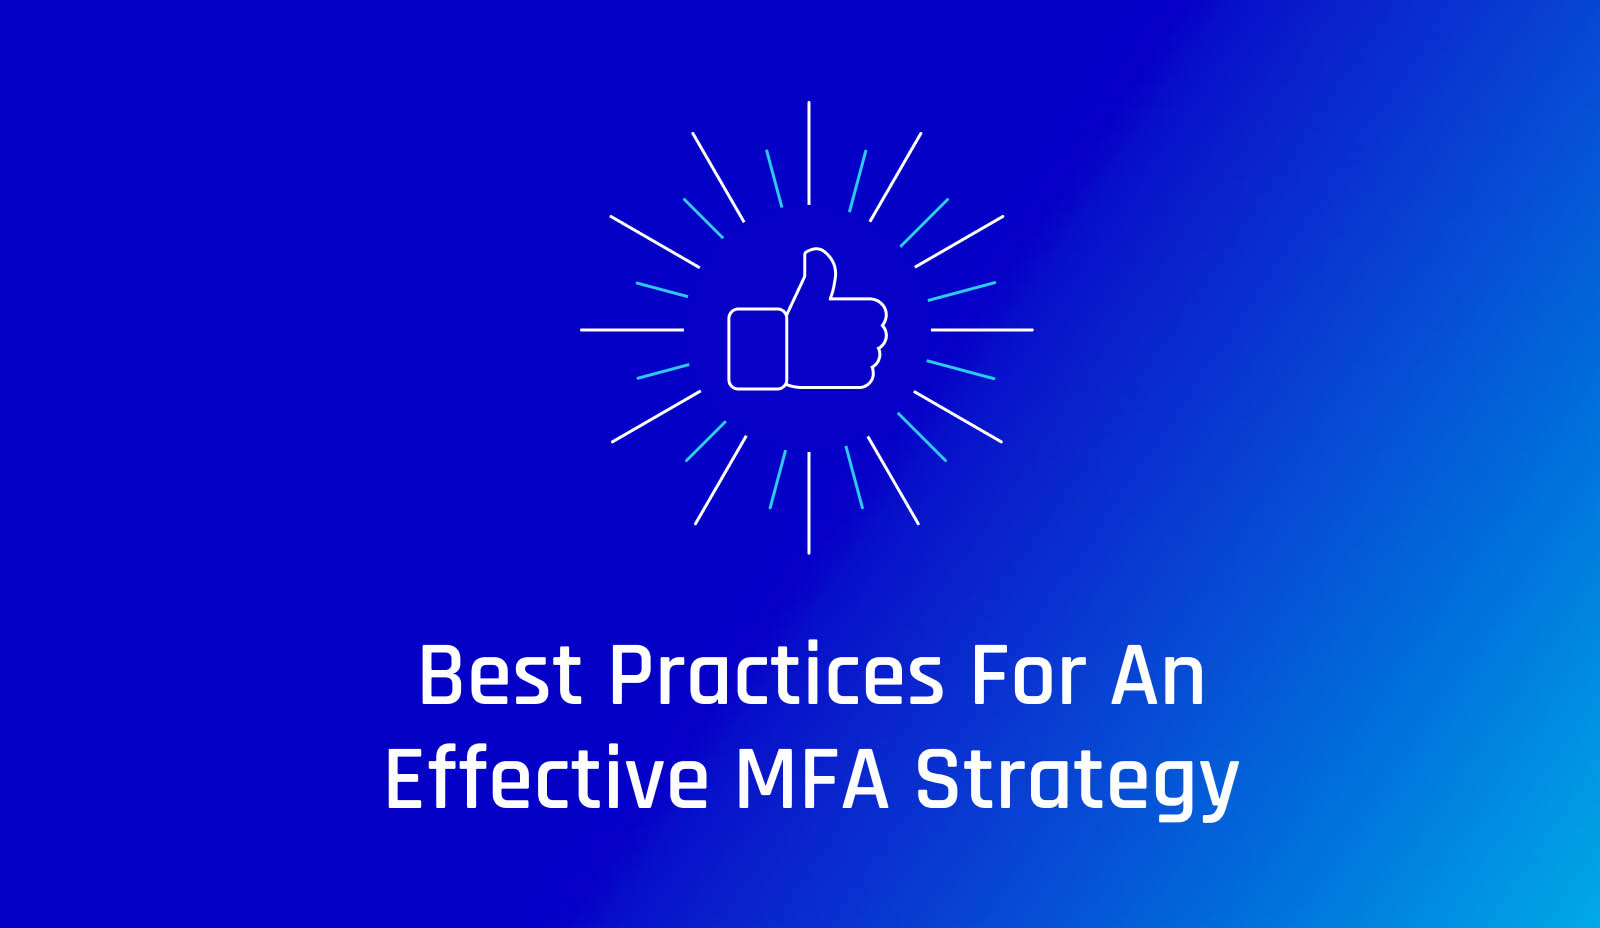 Seven Best Practices for an Effective MFA Strategy